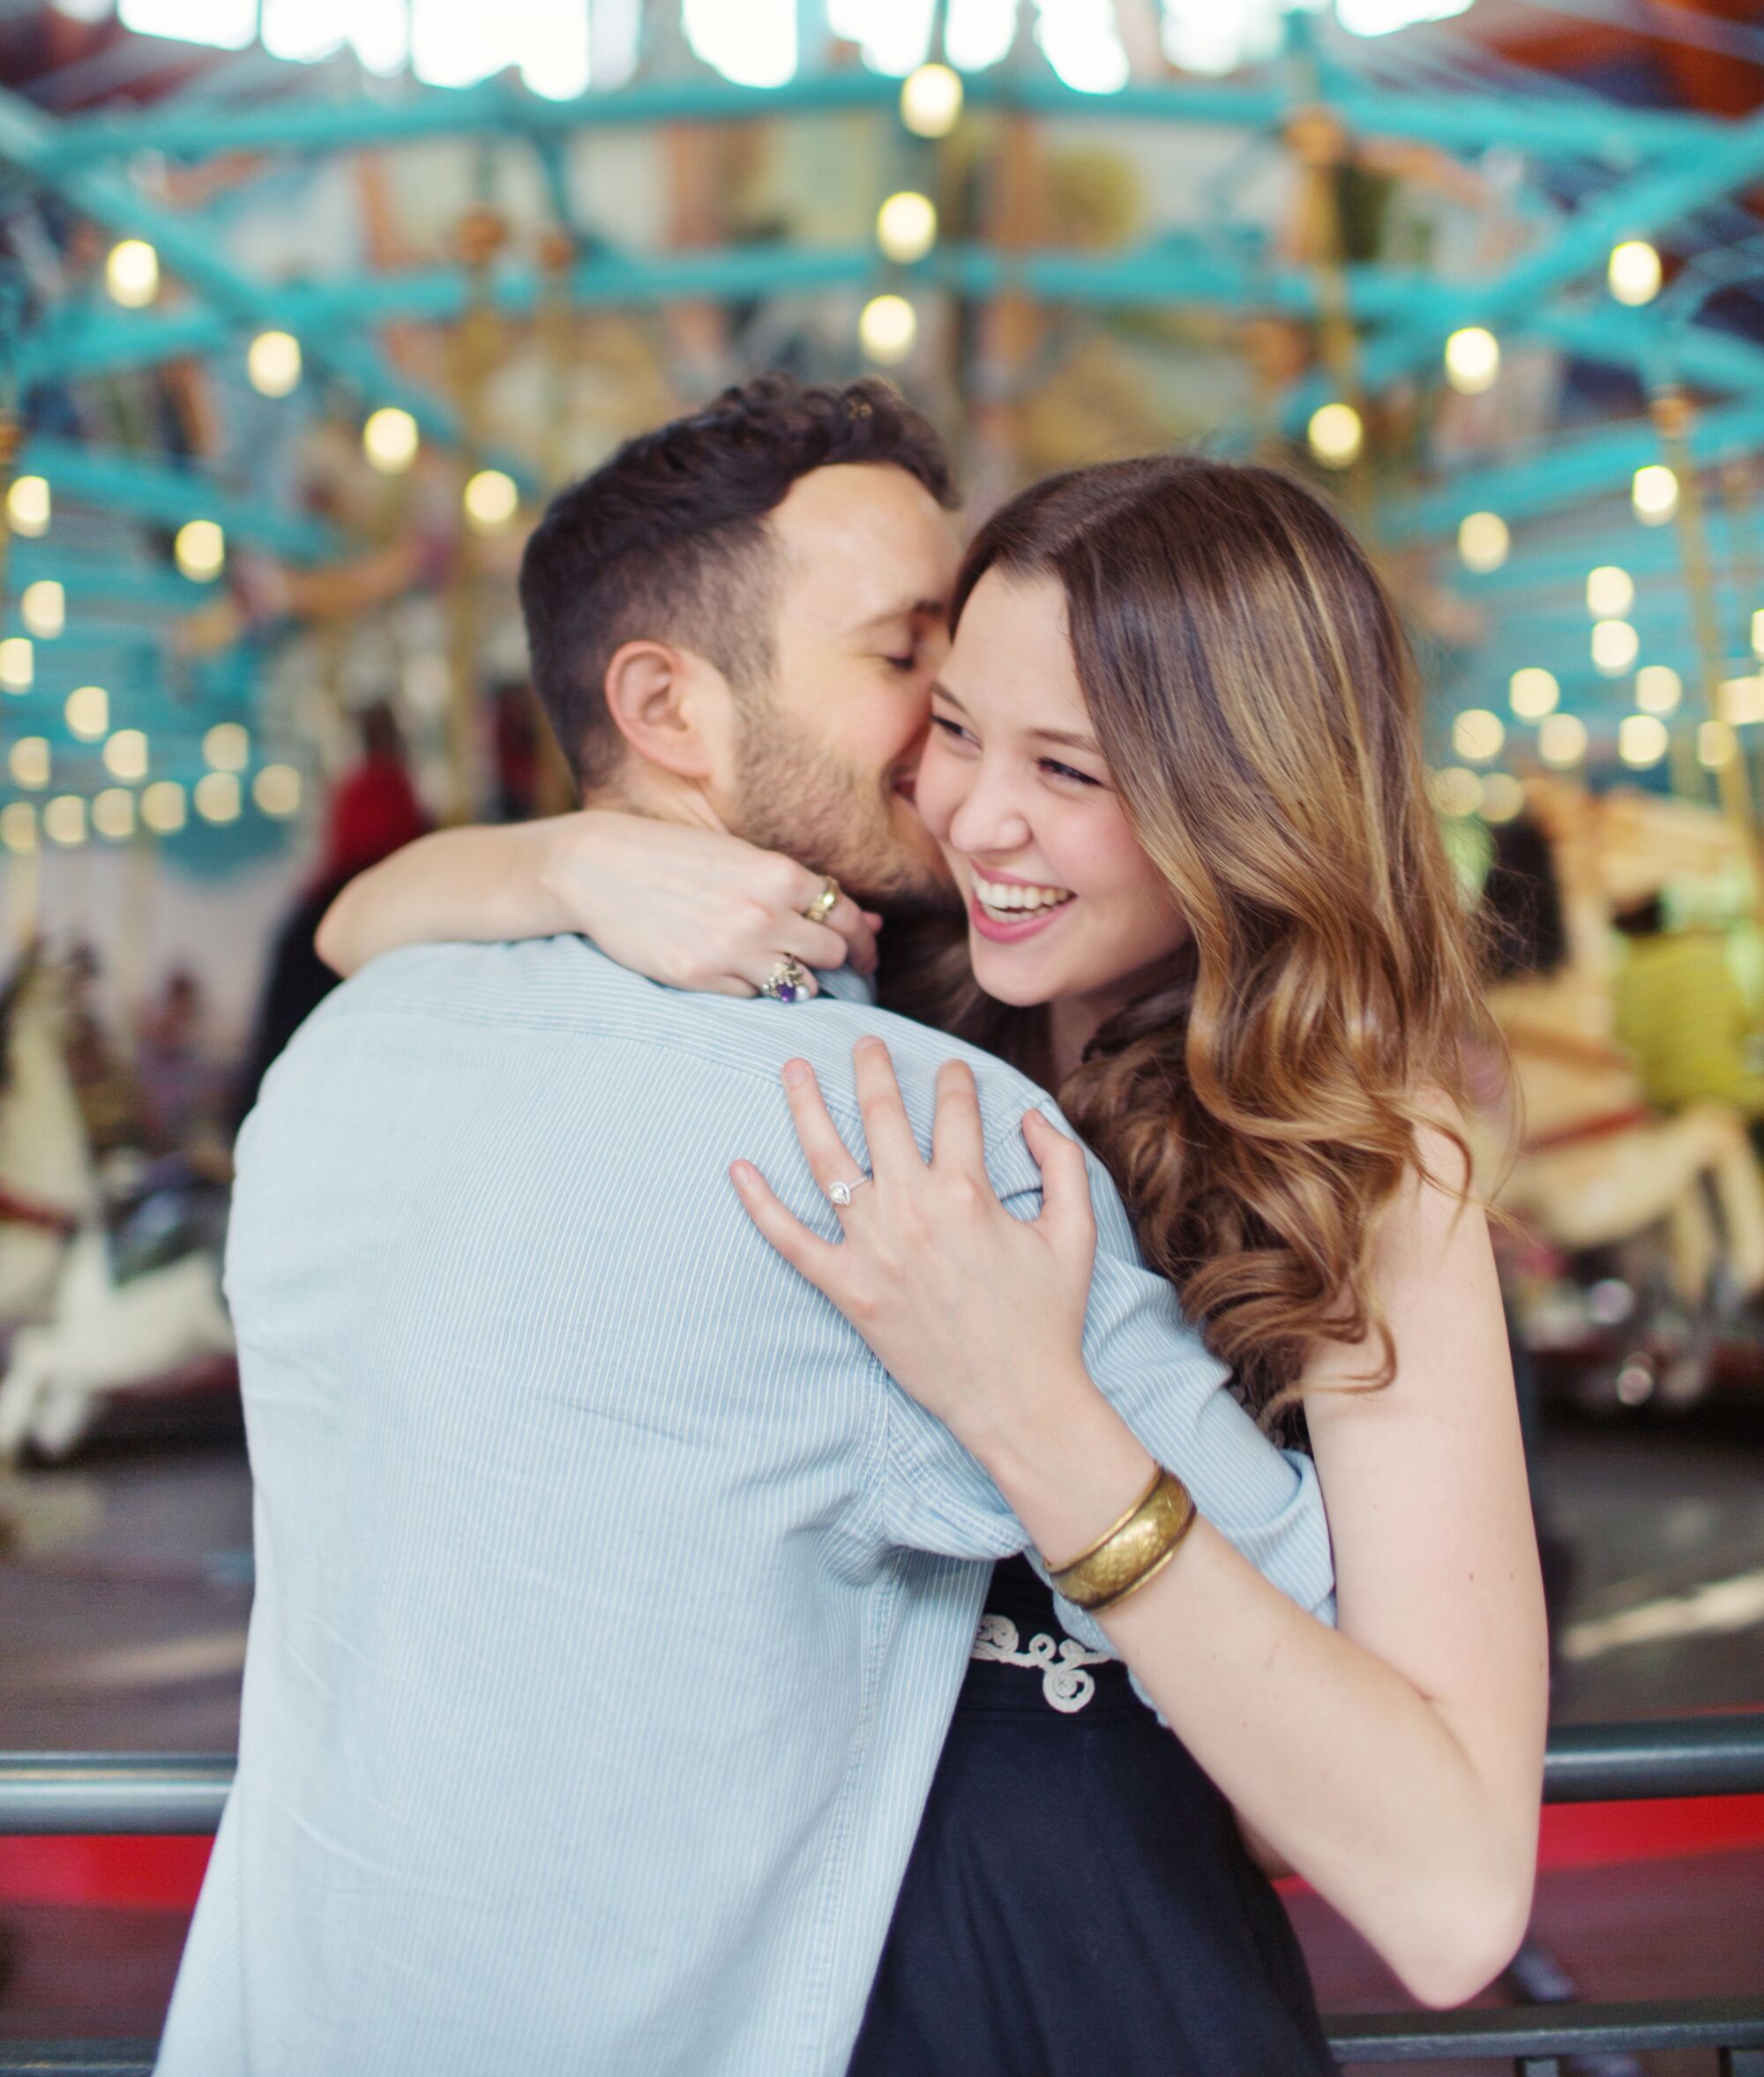 7 of the Sweetest Proposals We've Ever Seen